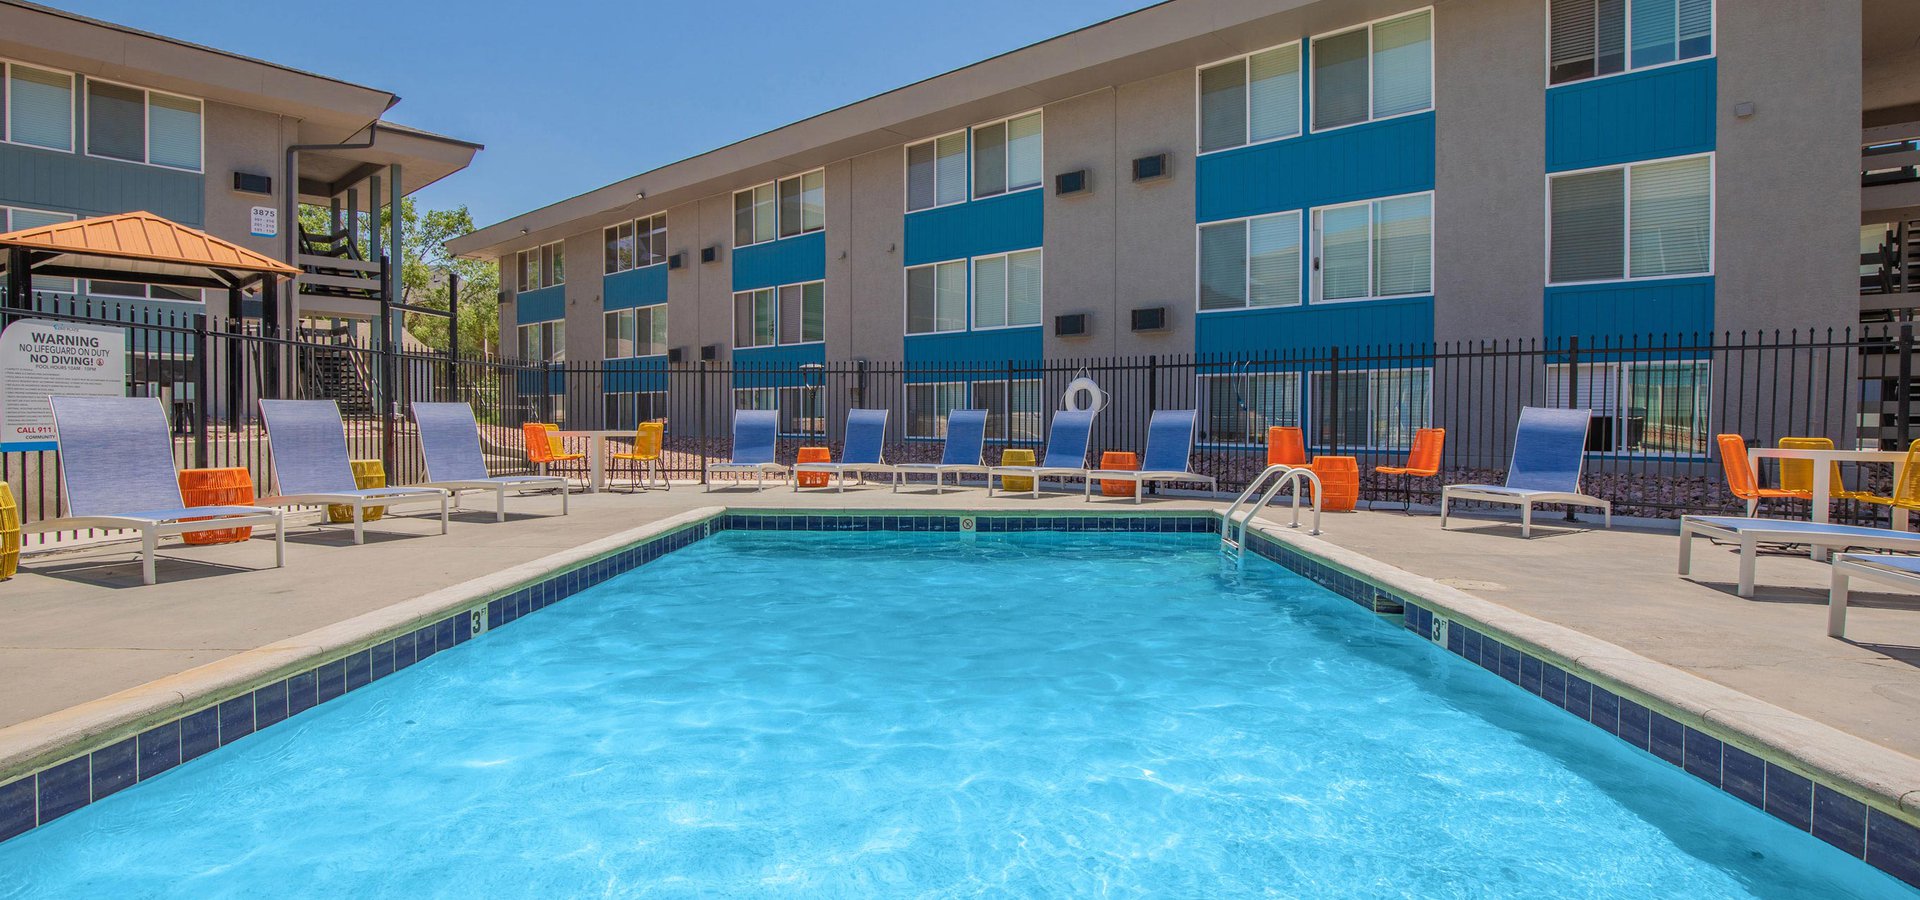 beautiful pool at the Aero Place Apartments, in Colorado Springs, CO.